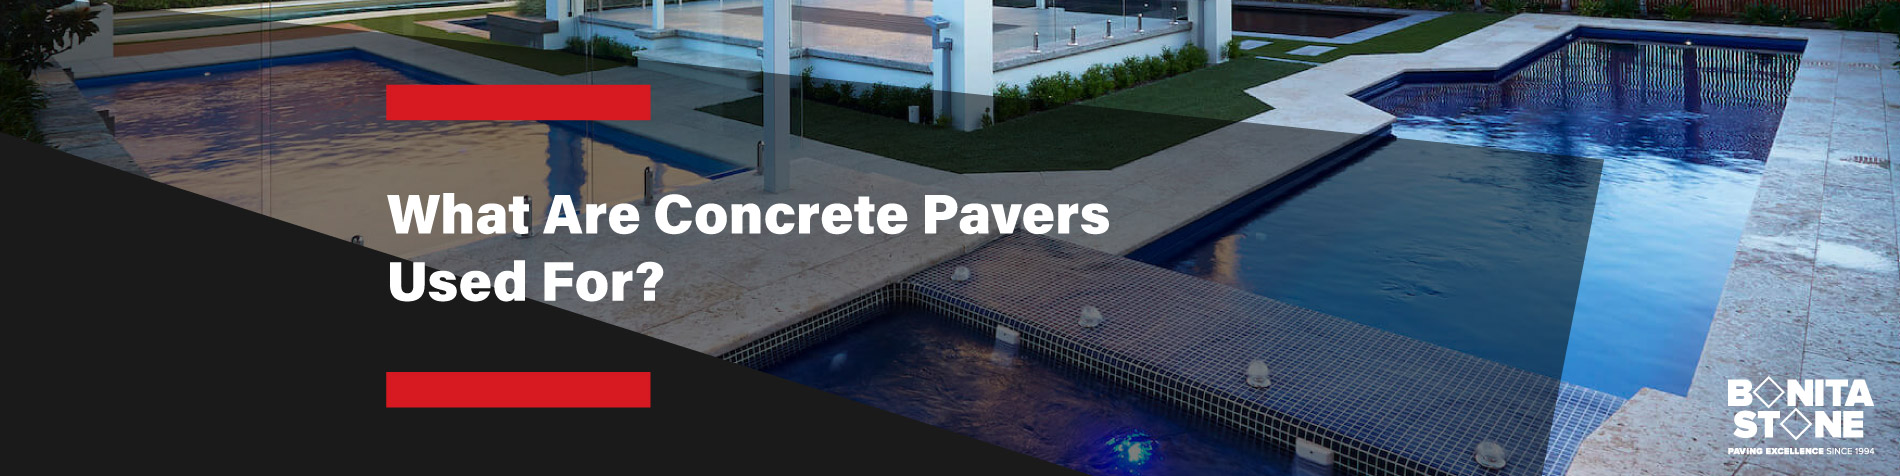 what-are-concrete-pavers-used-for-banner